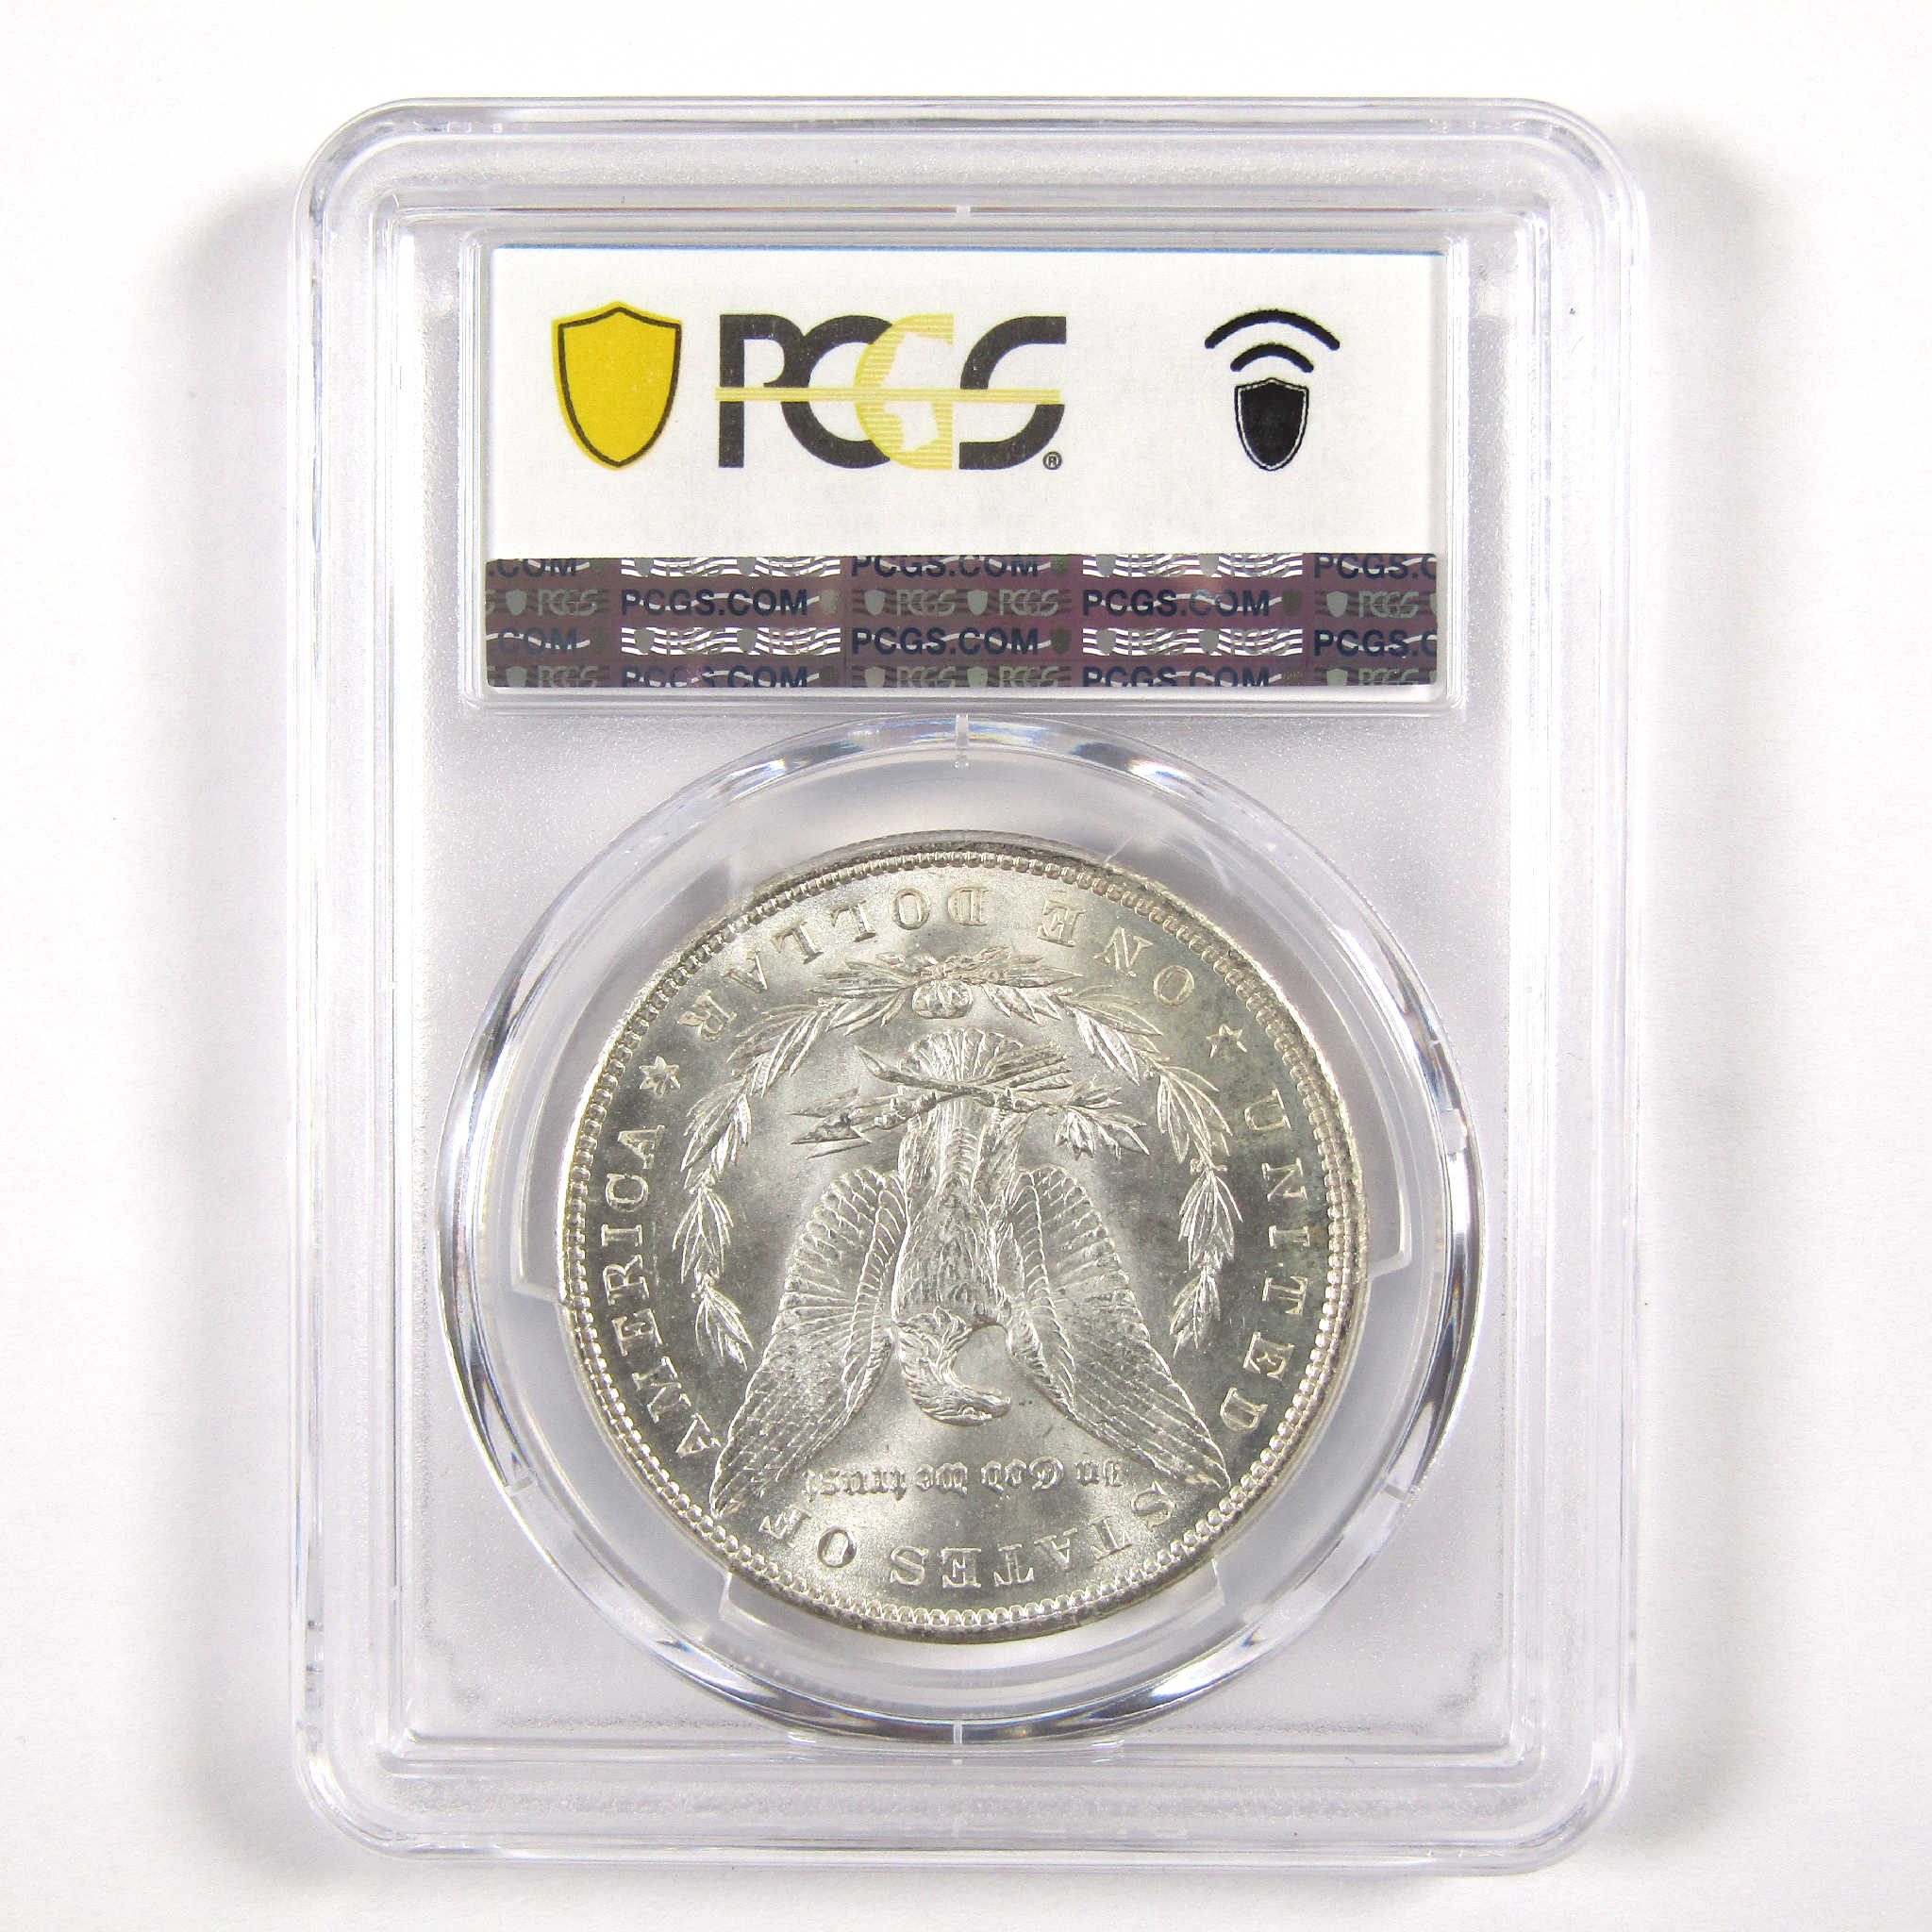 1900 Morgan Dollar MS 63 PCGS Silver $1 Uncirculated Coin SKU:I11549 - Morgan coin - Morgan silver dollar - Morgan silver dollar for sale - Profile Coins &amp; Collectibles